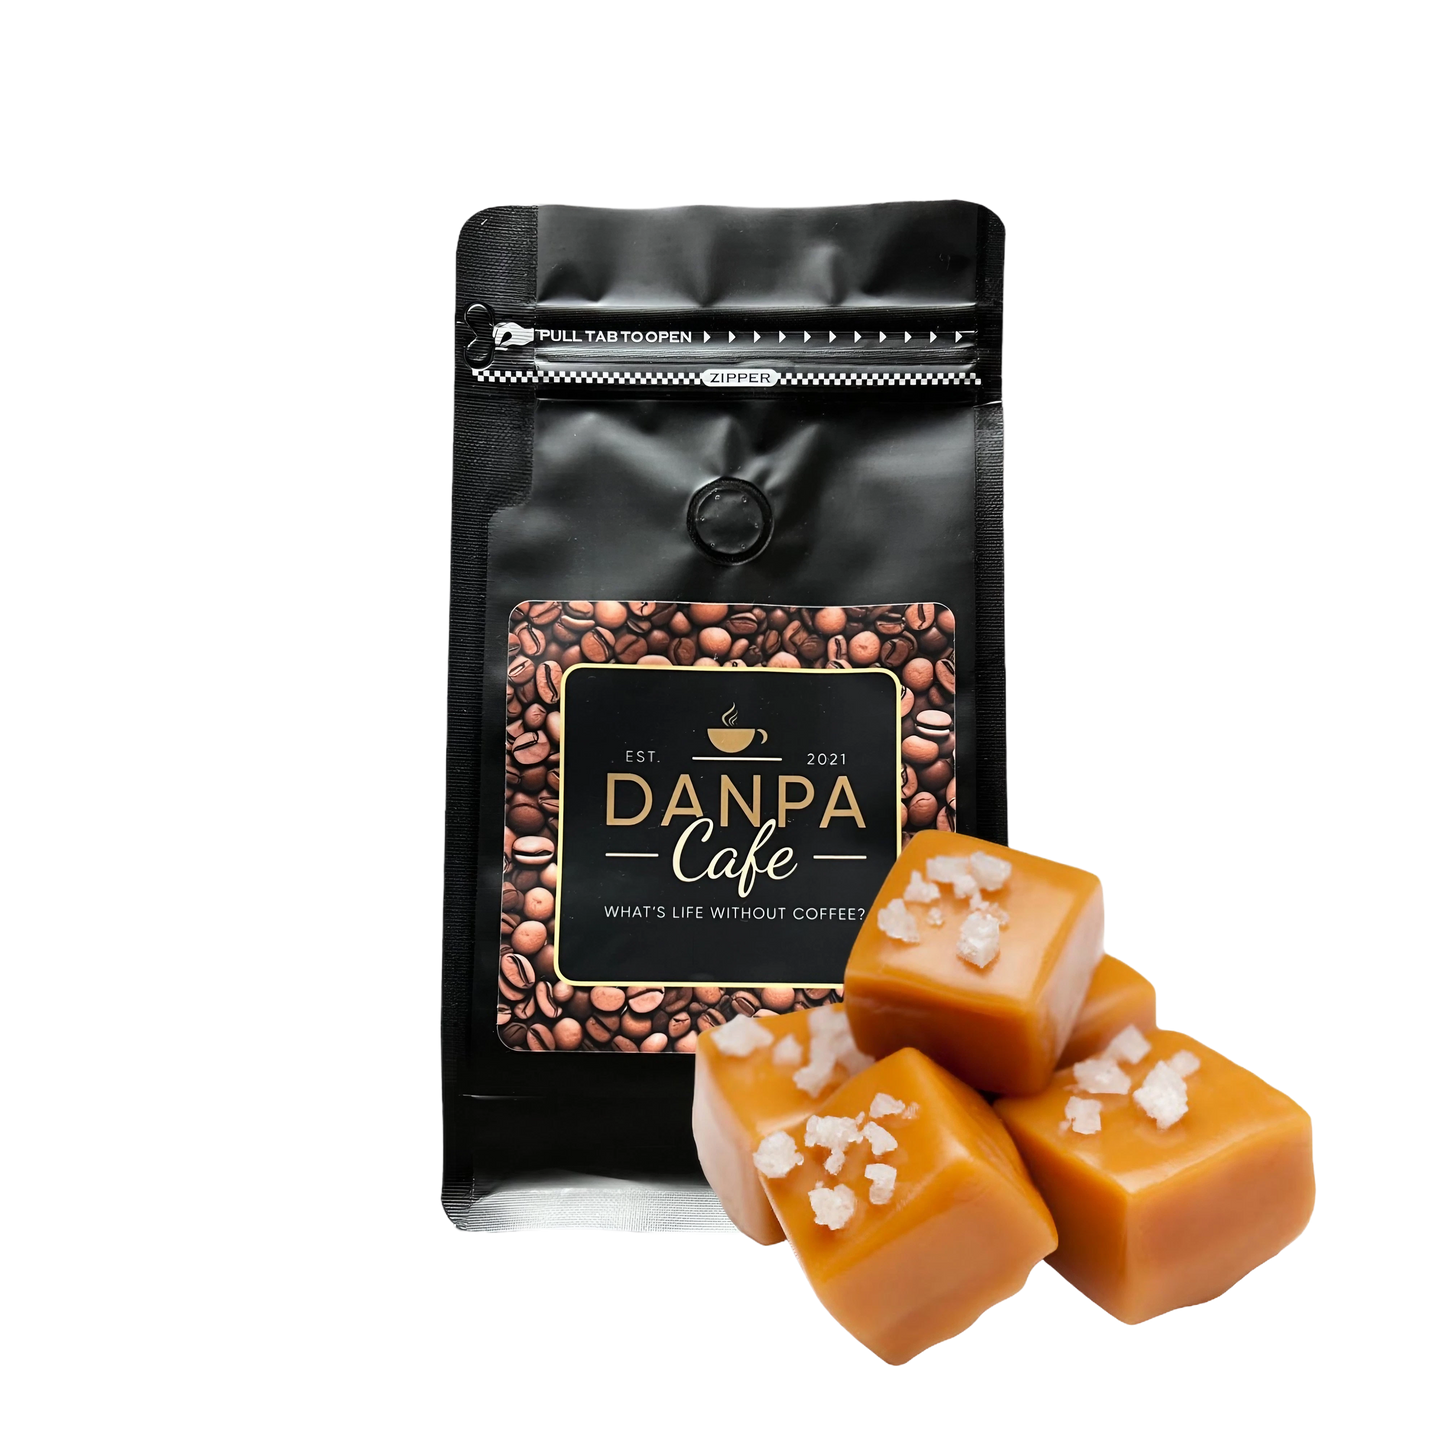 Salted Caramel product displayed on a cafe countertop